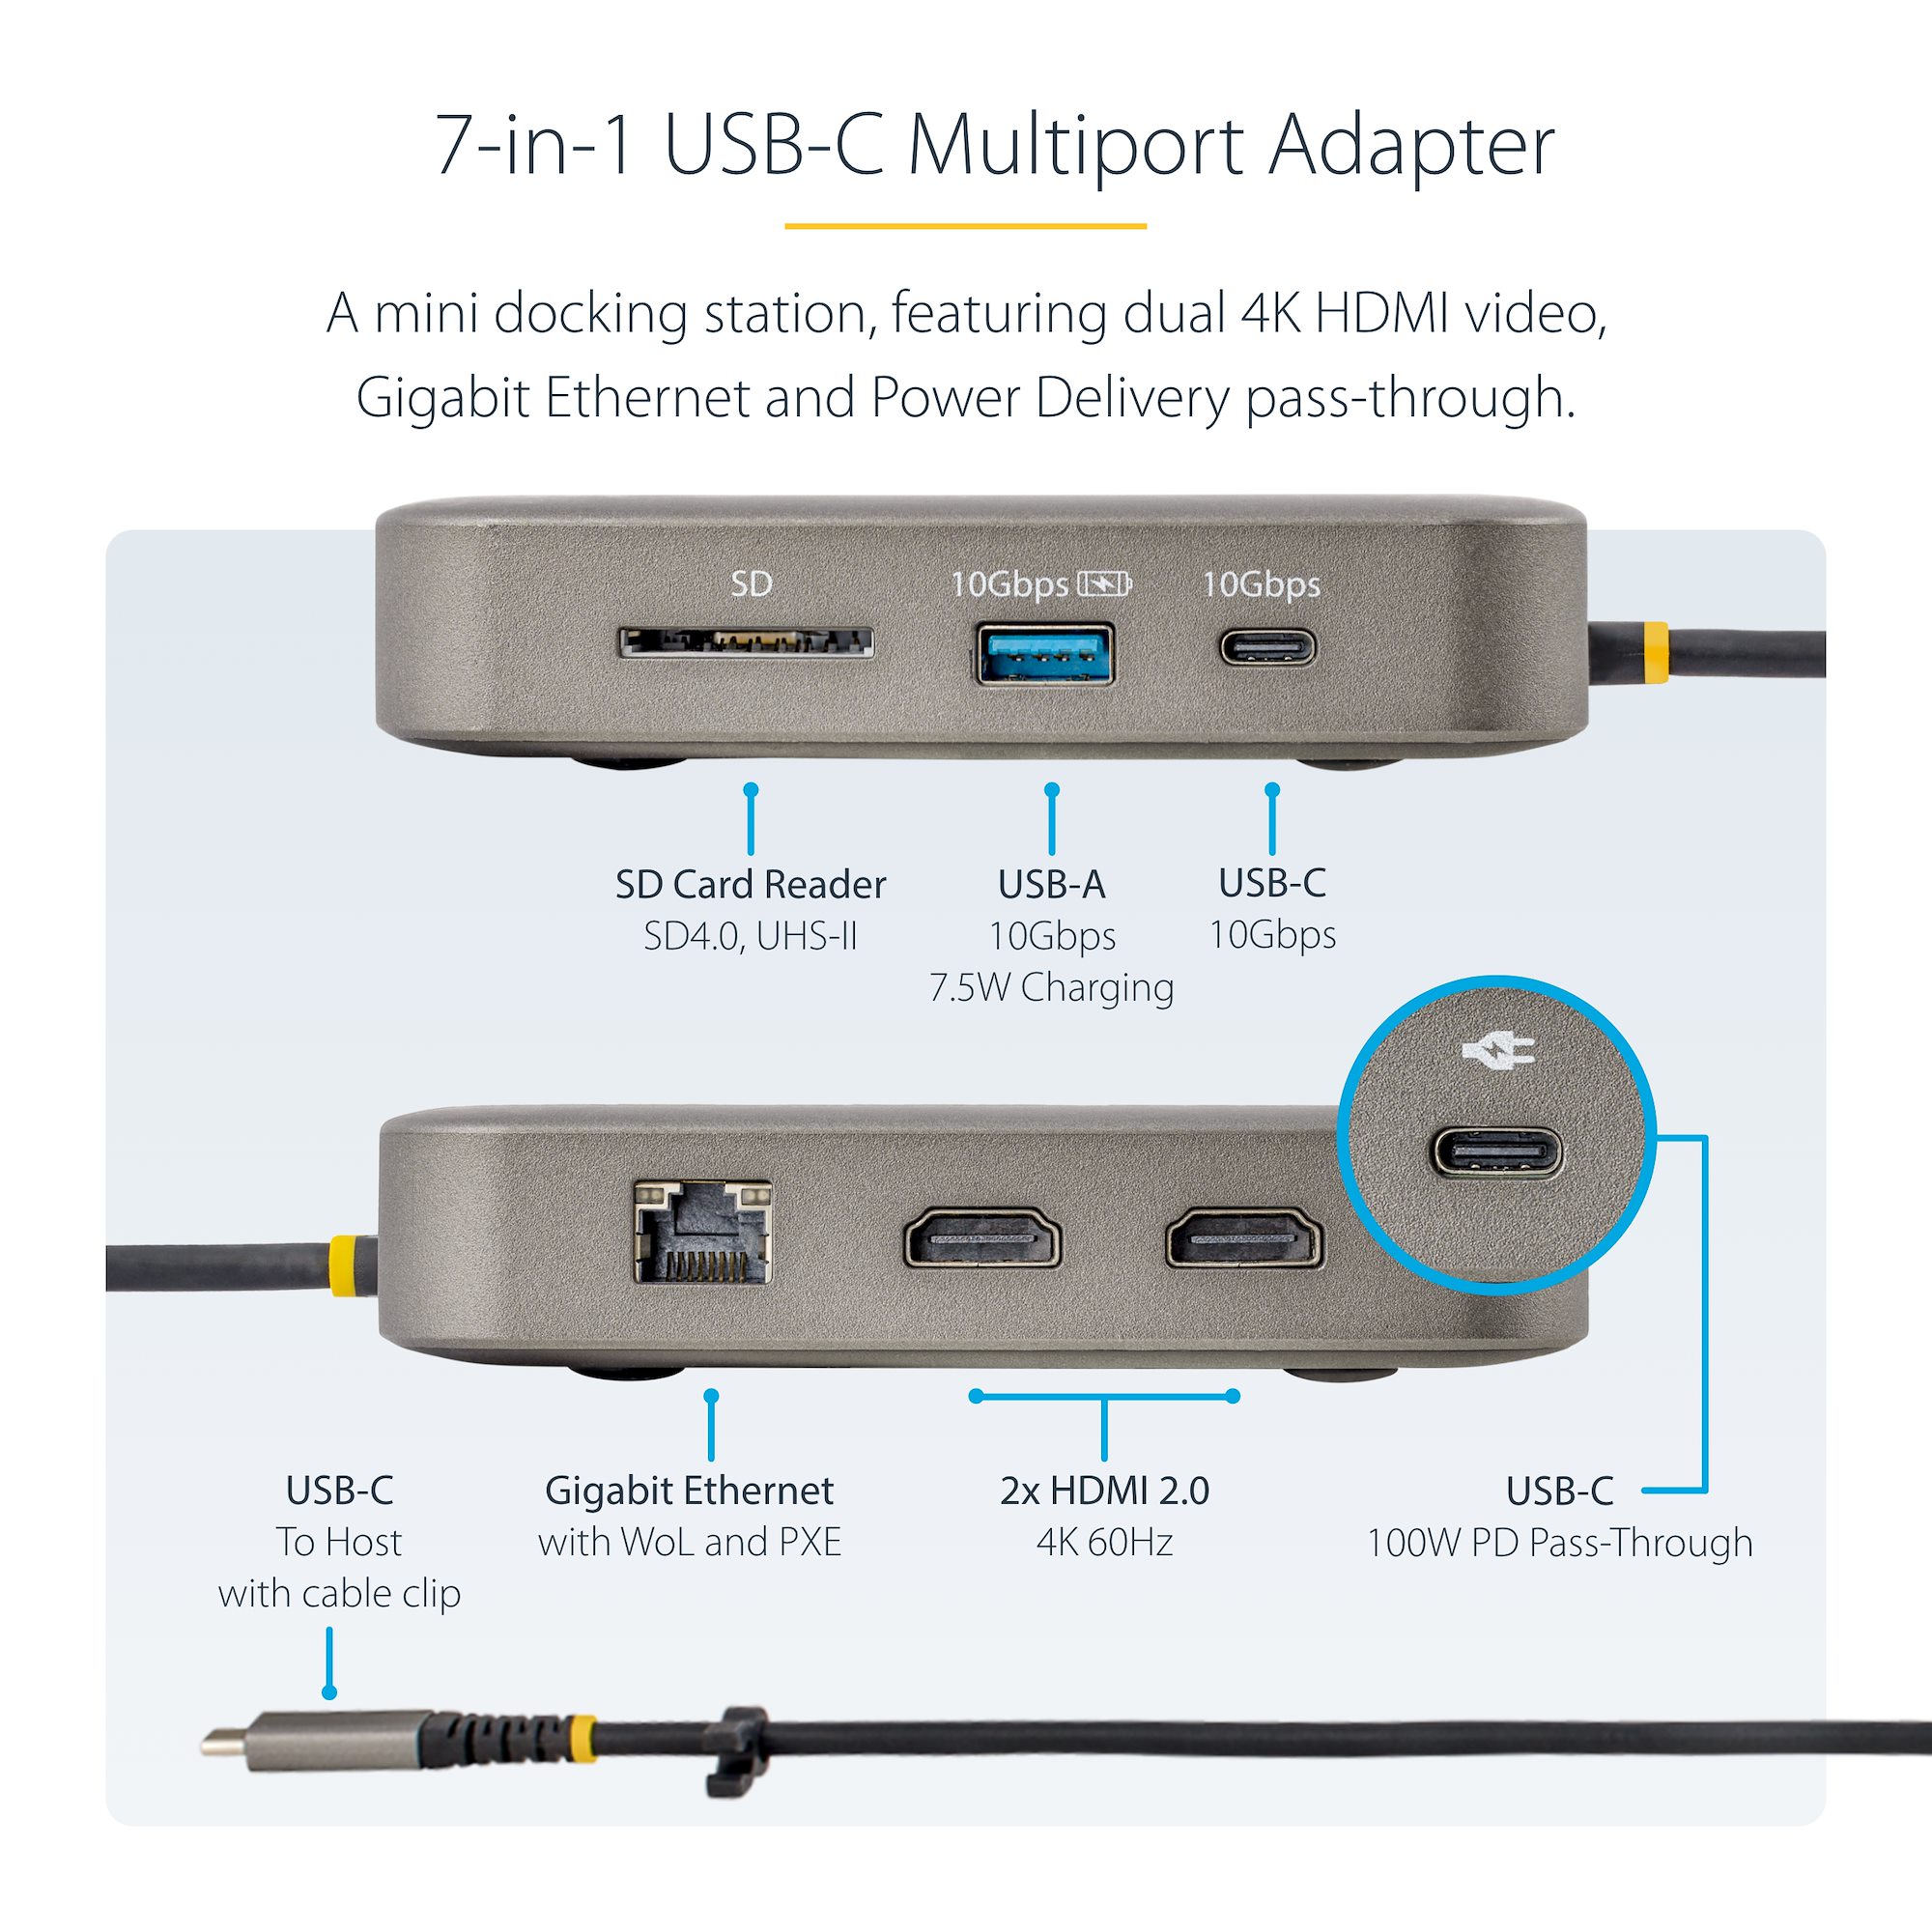 USB C Multiport Adapter Dual 4K HDMI, PD - USB-C Multiport Adapters, Universal Laptop Docking Stations